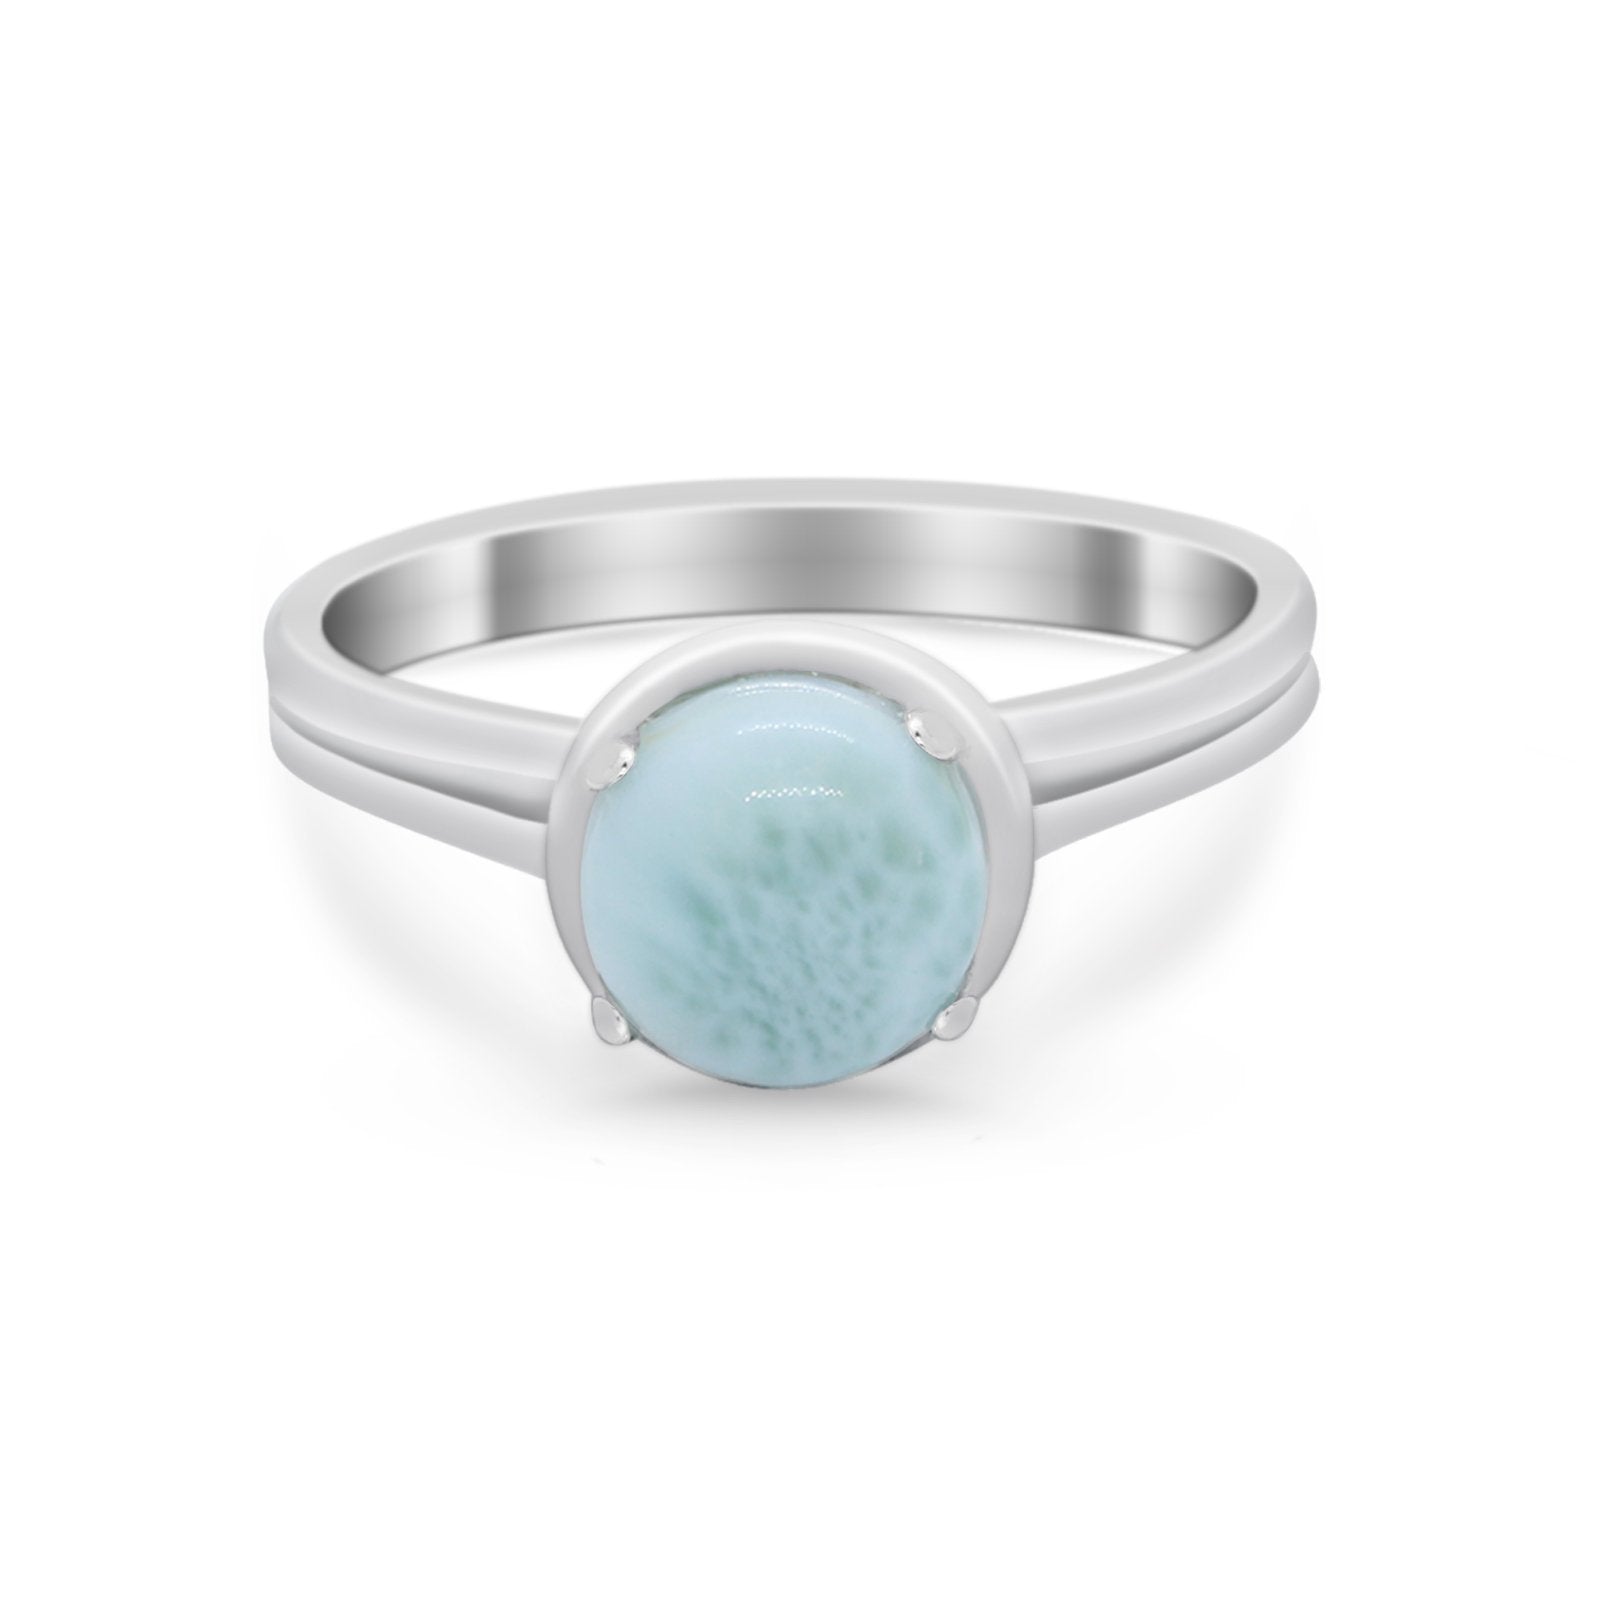 Solitaire Wedding Ring Double Band Shank Simulated Larimar CZ 925 Sterling Silver